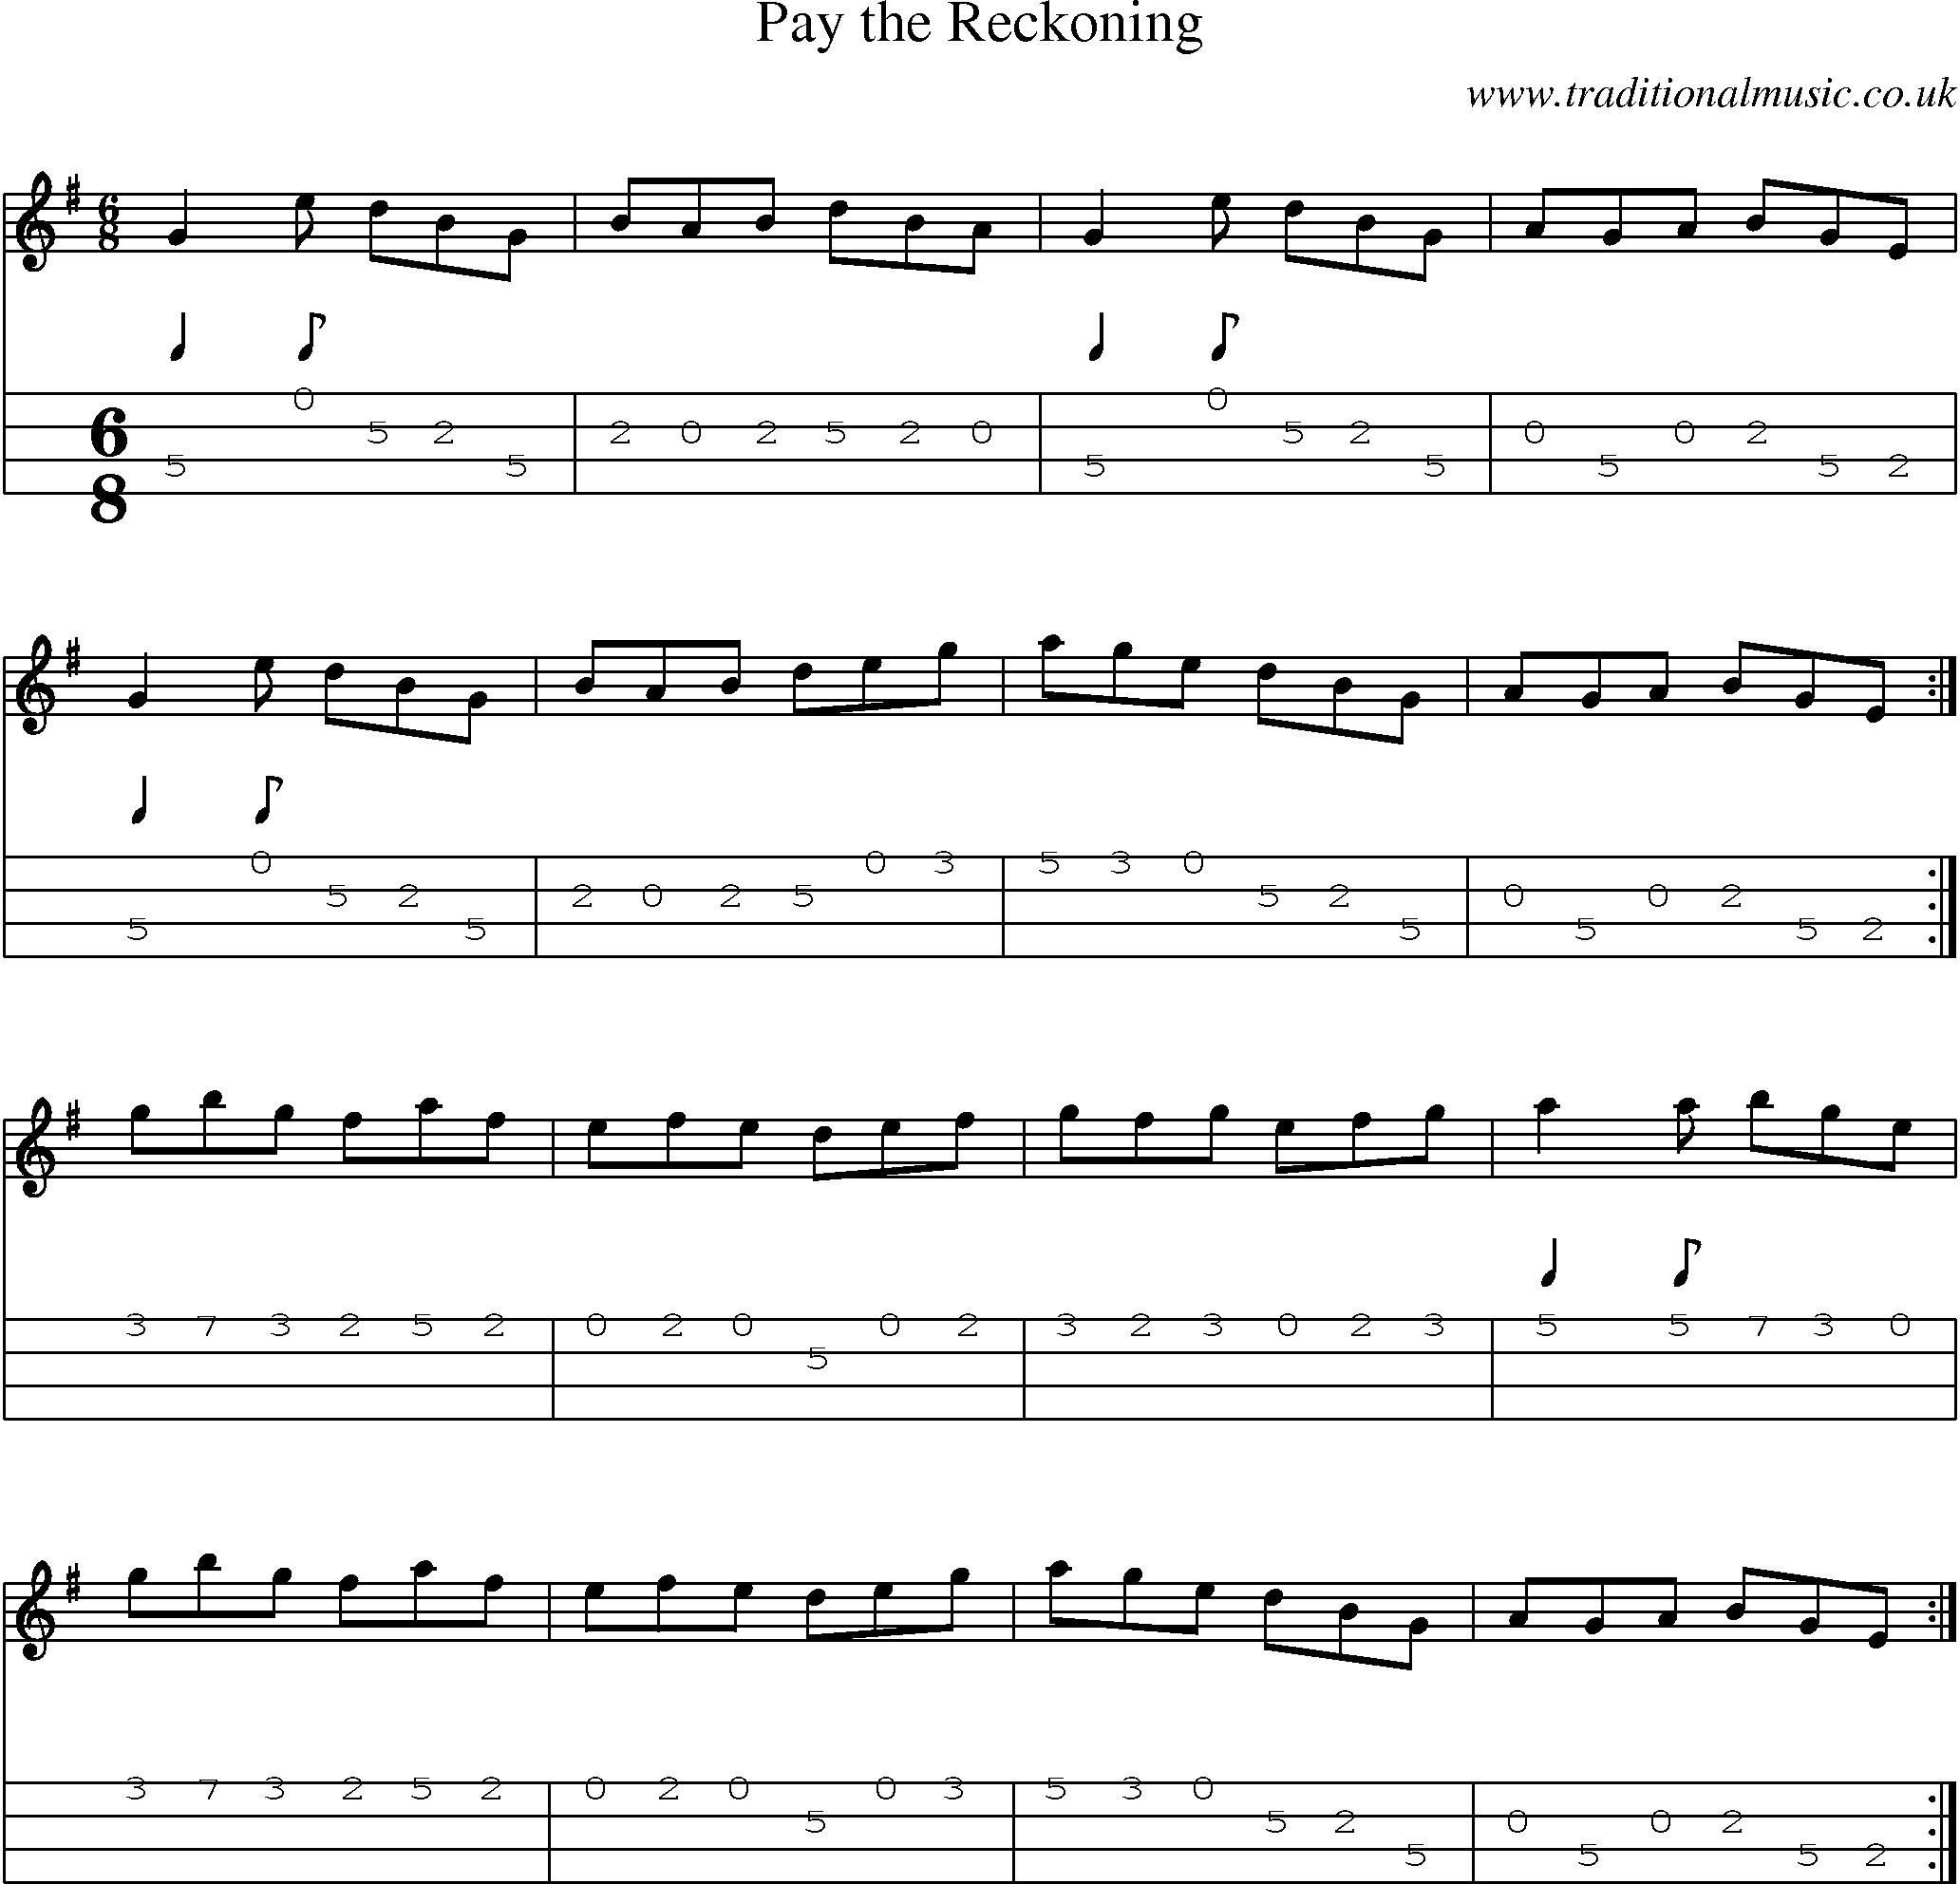 Music Score and Mandolin Tabs for Pay Reckoning